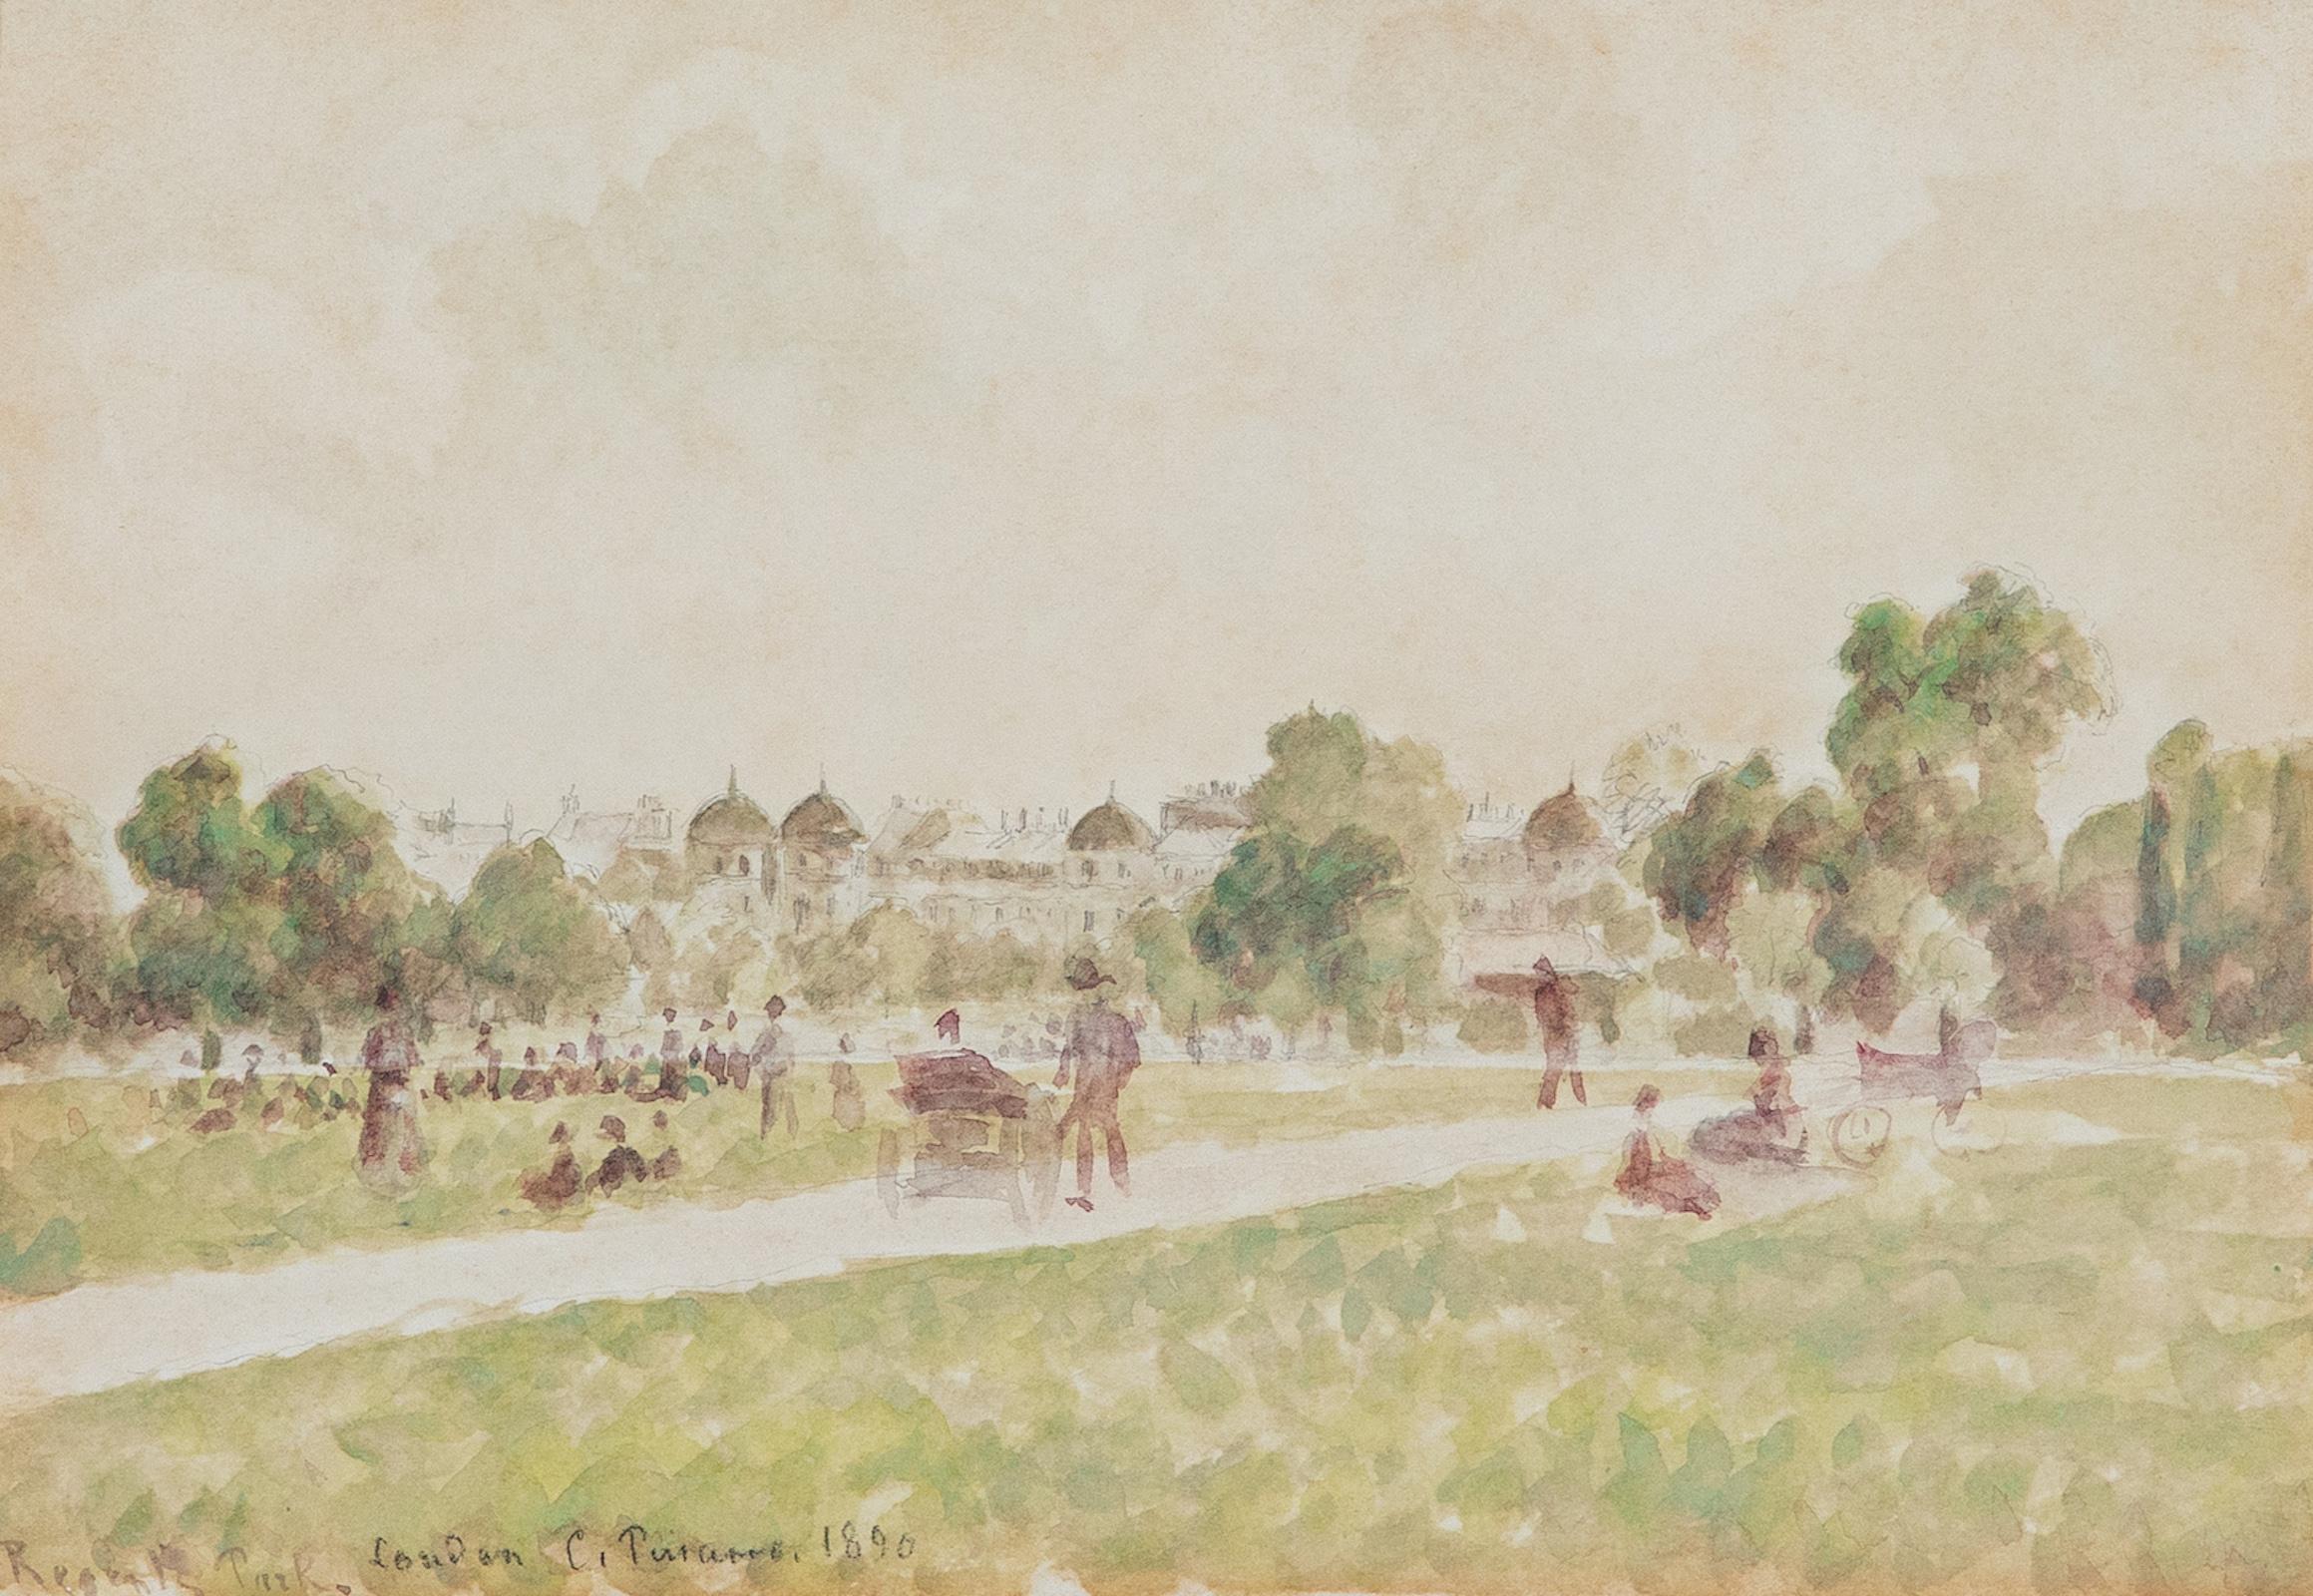 Regent's Park, London by Camille Pissarro (1830-1903)
Watercolour on paper
16.5 x 24.5 cm (6 ¹/₂ x 9 ⁵/₈ inches)
Inscribed, signed and dated lower left, C.Pissarro 1890

Camille Pissarro painted this watercolour during his visit in London to see his